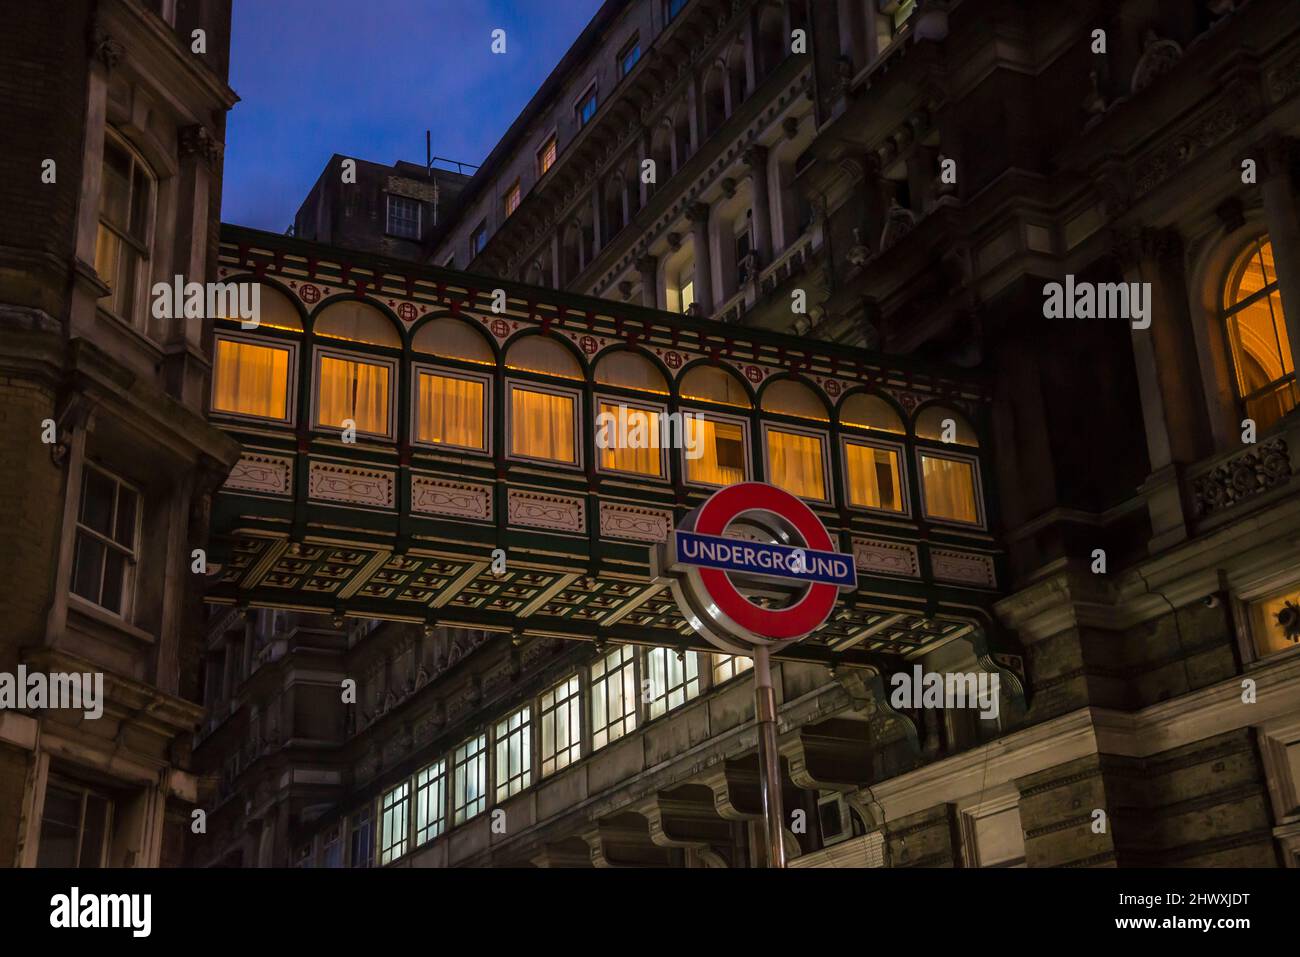 Charing Cross Underground sign and the Clermont hotel bridge crossing the street in Villiers Street, London, England, UK Stock Photo